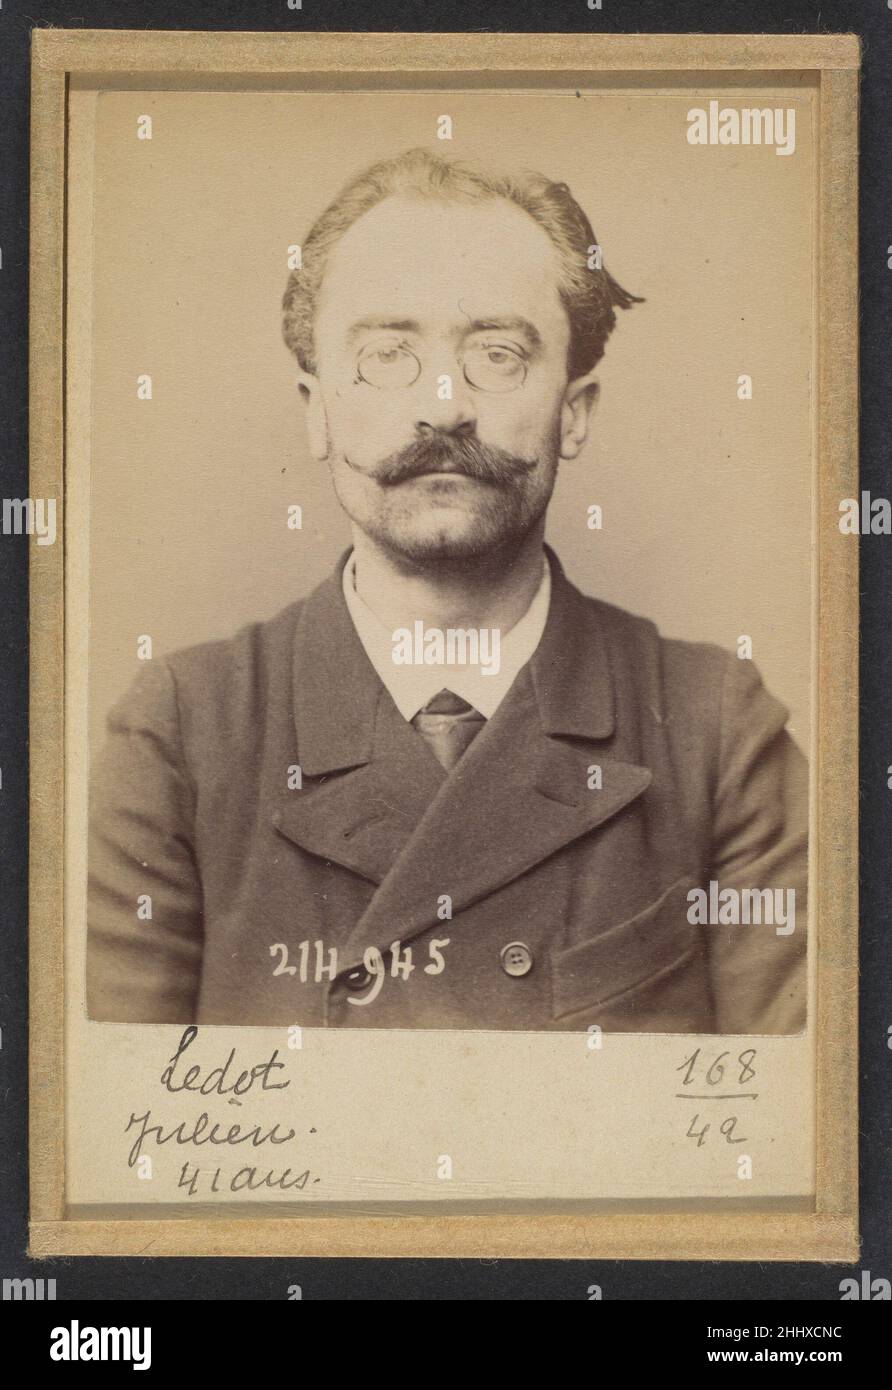 Ledot. Julien. 41 ans, né à Bourges (Cher). Employé. Anarchiste. 1/3/94. 1894 Alphonse Bertillon Born into a distinguished family of scientists and statisticians, Bertillon began his career as a clerk in the Identification Bureau of the Paris Prefecture of Police in 1879. Tasked with maintaining reliable police records of offenders, he developed the first modern system of criminal identification. The system, which became known as Bertillonage, had three components: anthropometric measurement, precise verbal description of the prisoner’s physical characteristics, and standardized photographs of Stock Photo